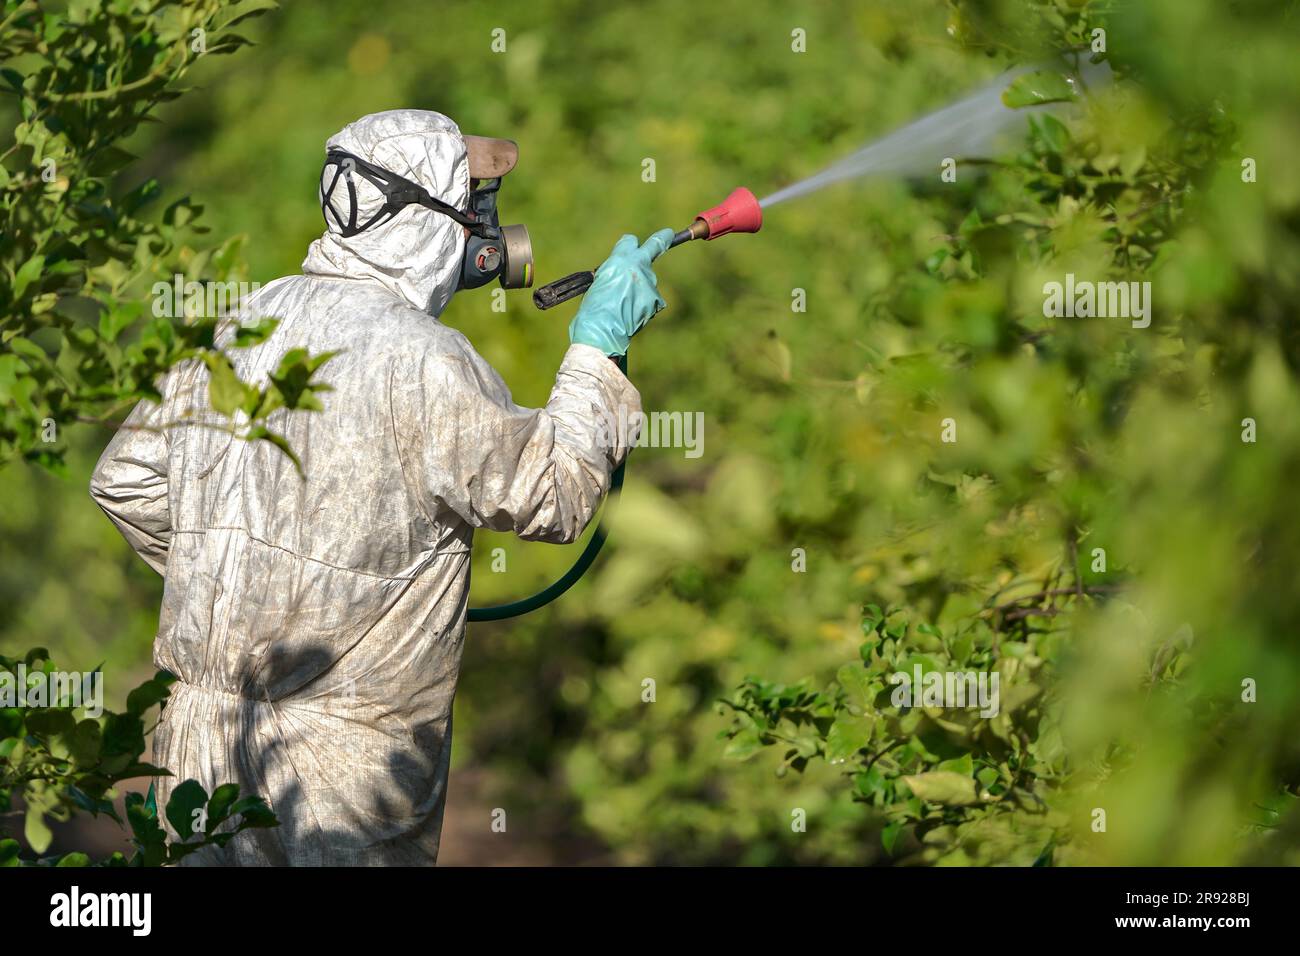 Farm worker spraying pesticide on lemon trees in protective suit Stock Photo